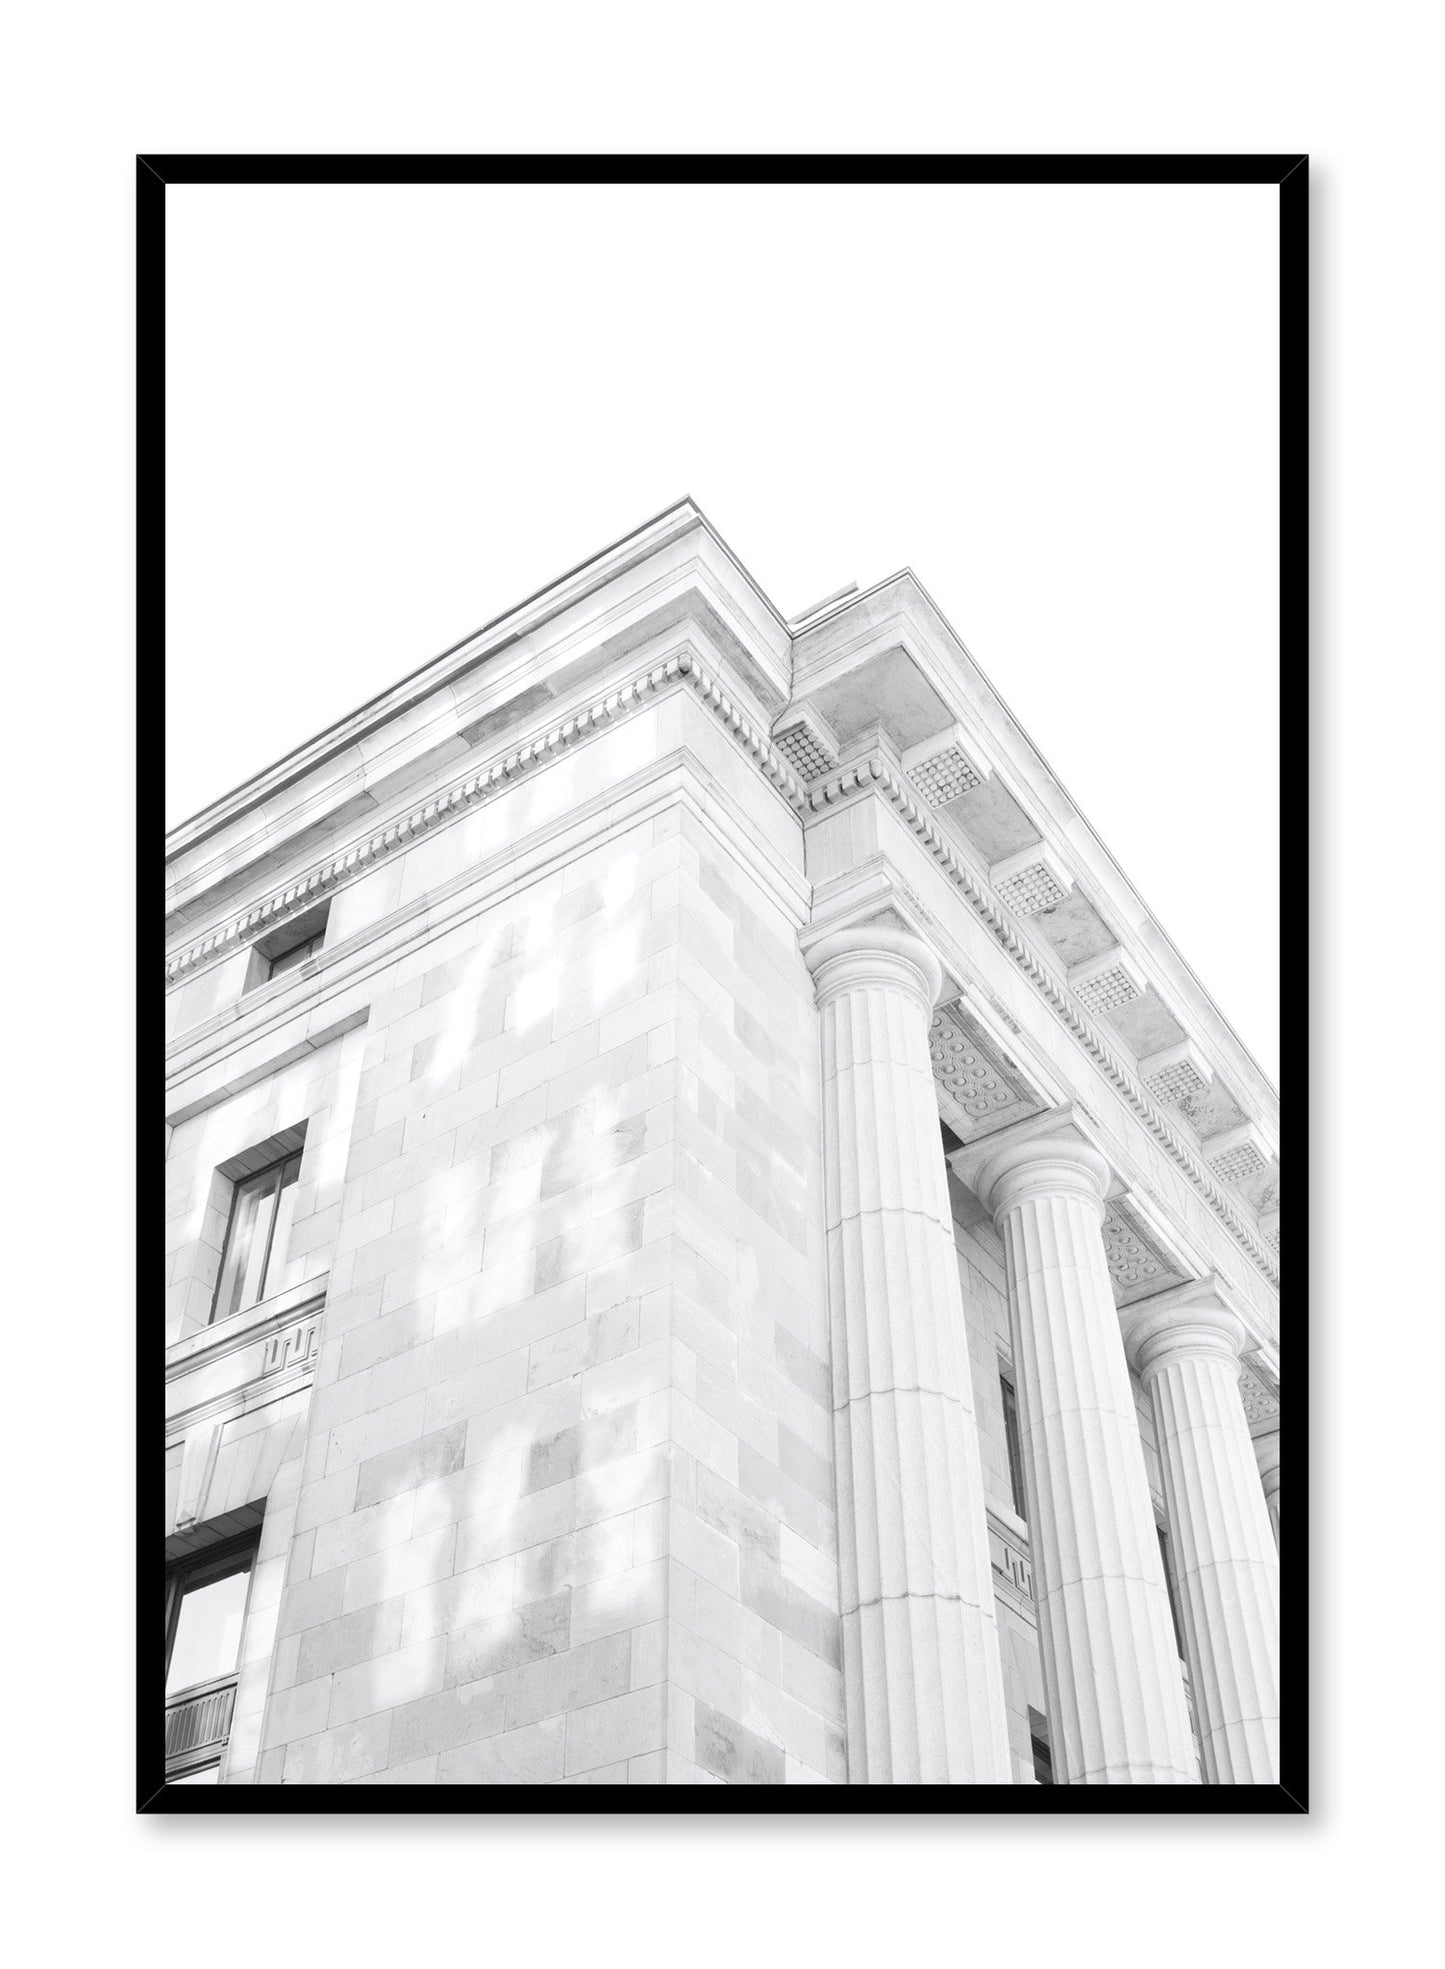 Modern minimalist poster by Opposite Wall with black and white architecture photography of Corner Facade